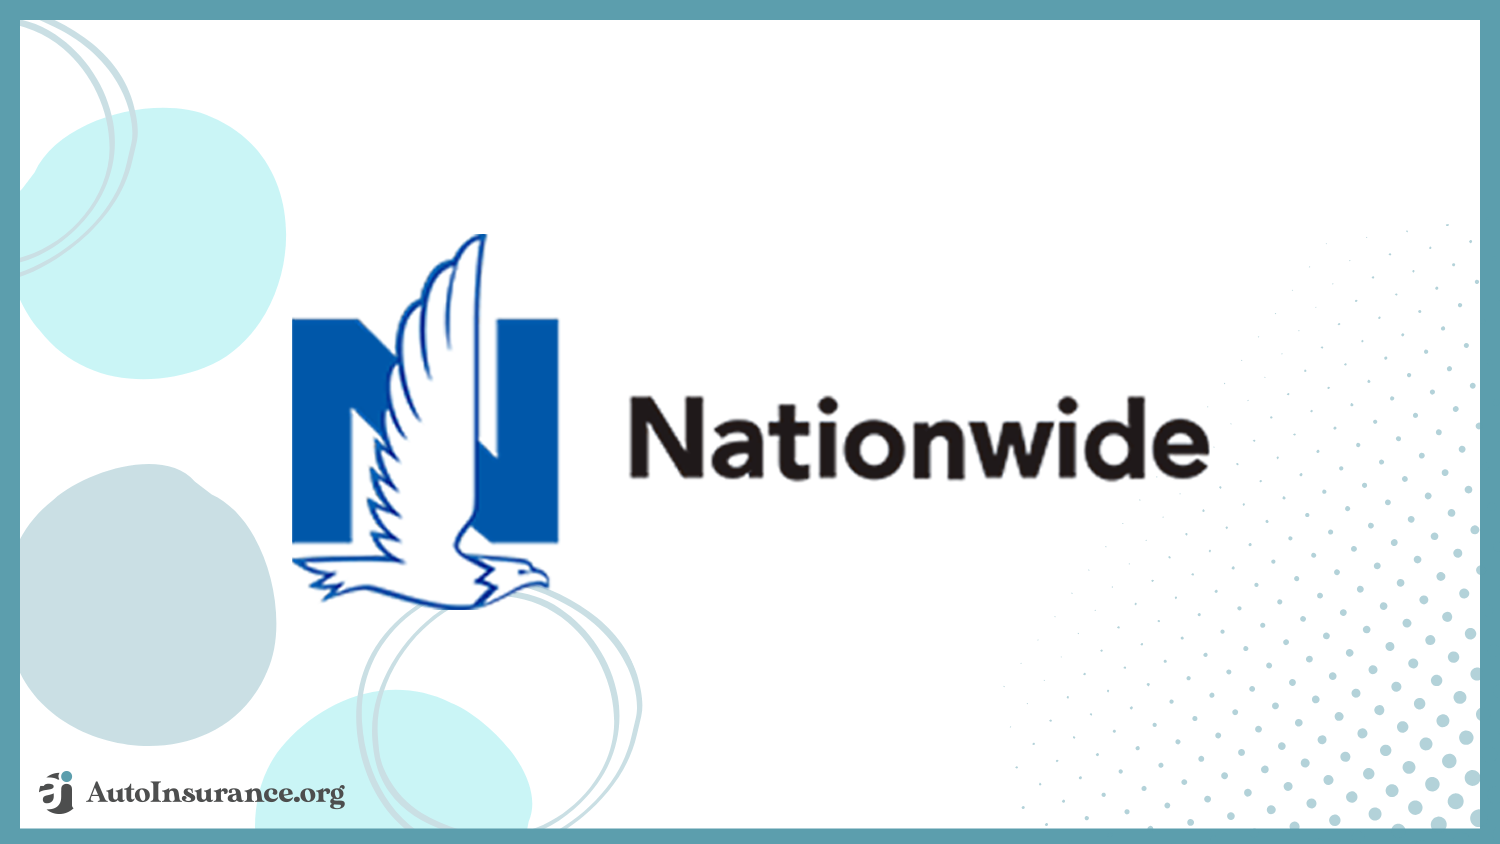 Nationwide: Best Auto Insurance for Custom Cars